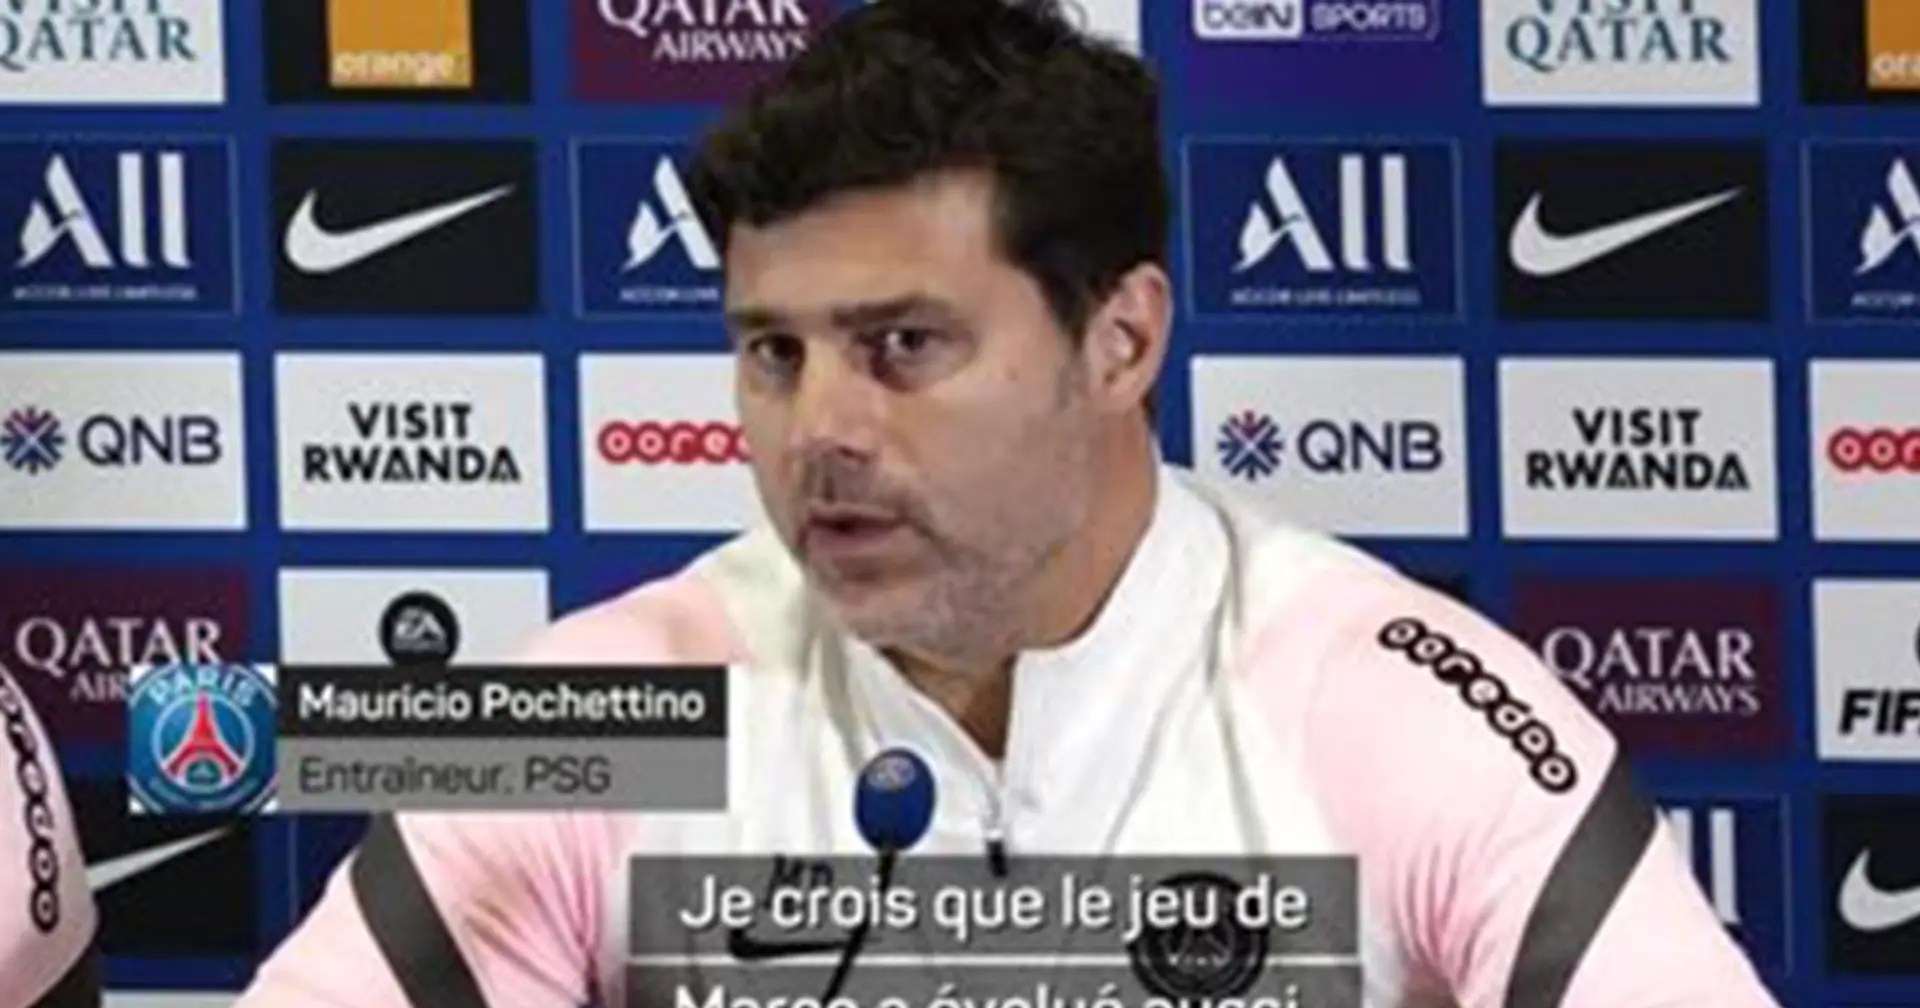 Pochettino opens up on Rennes loss, explains why PSG haven't scored any goals